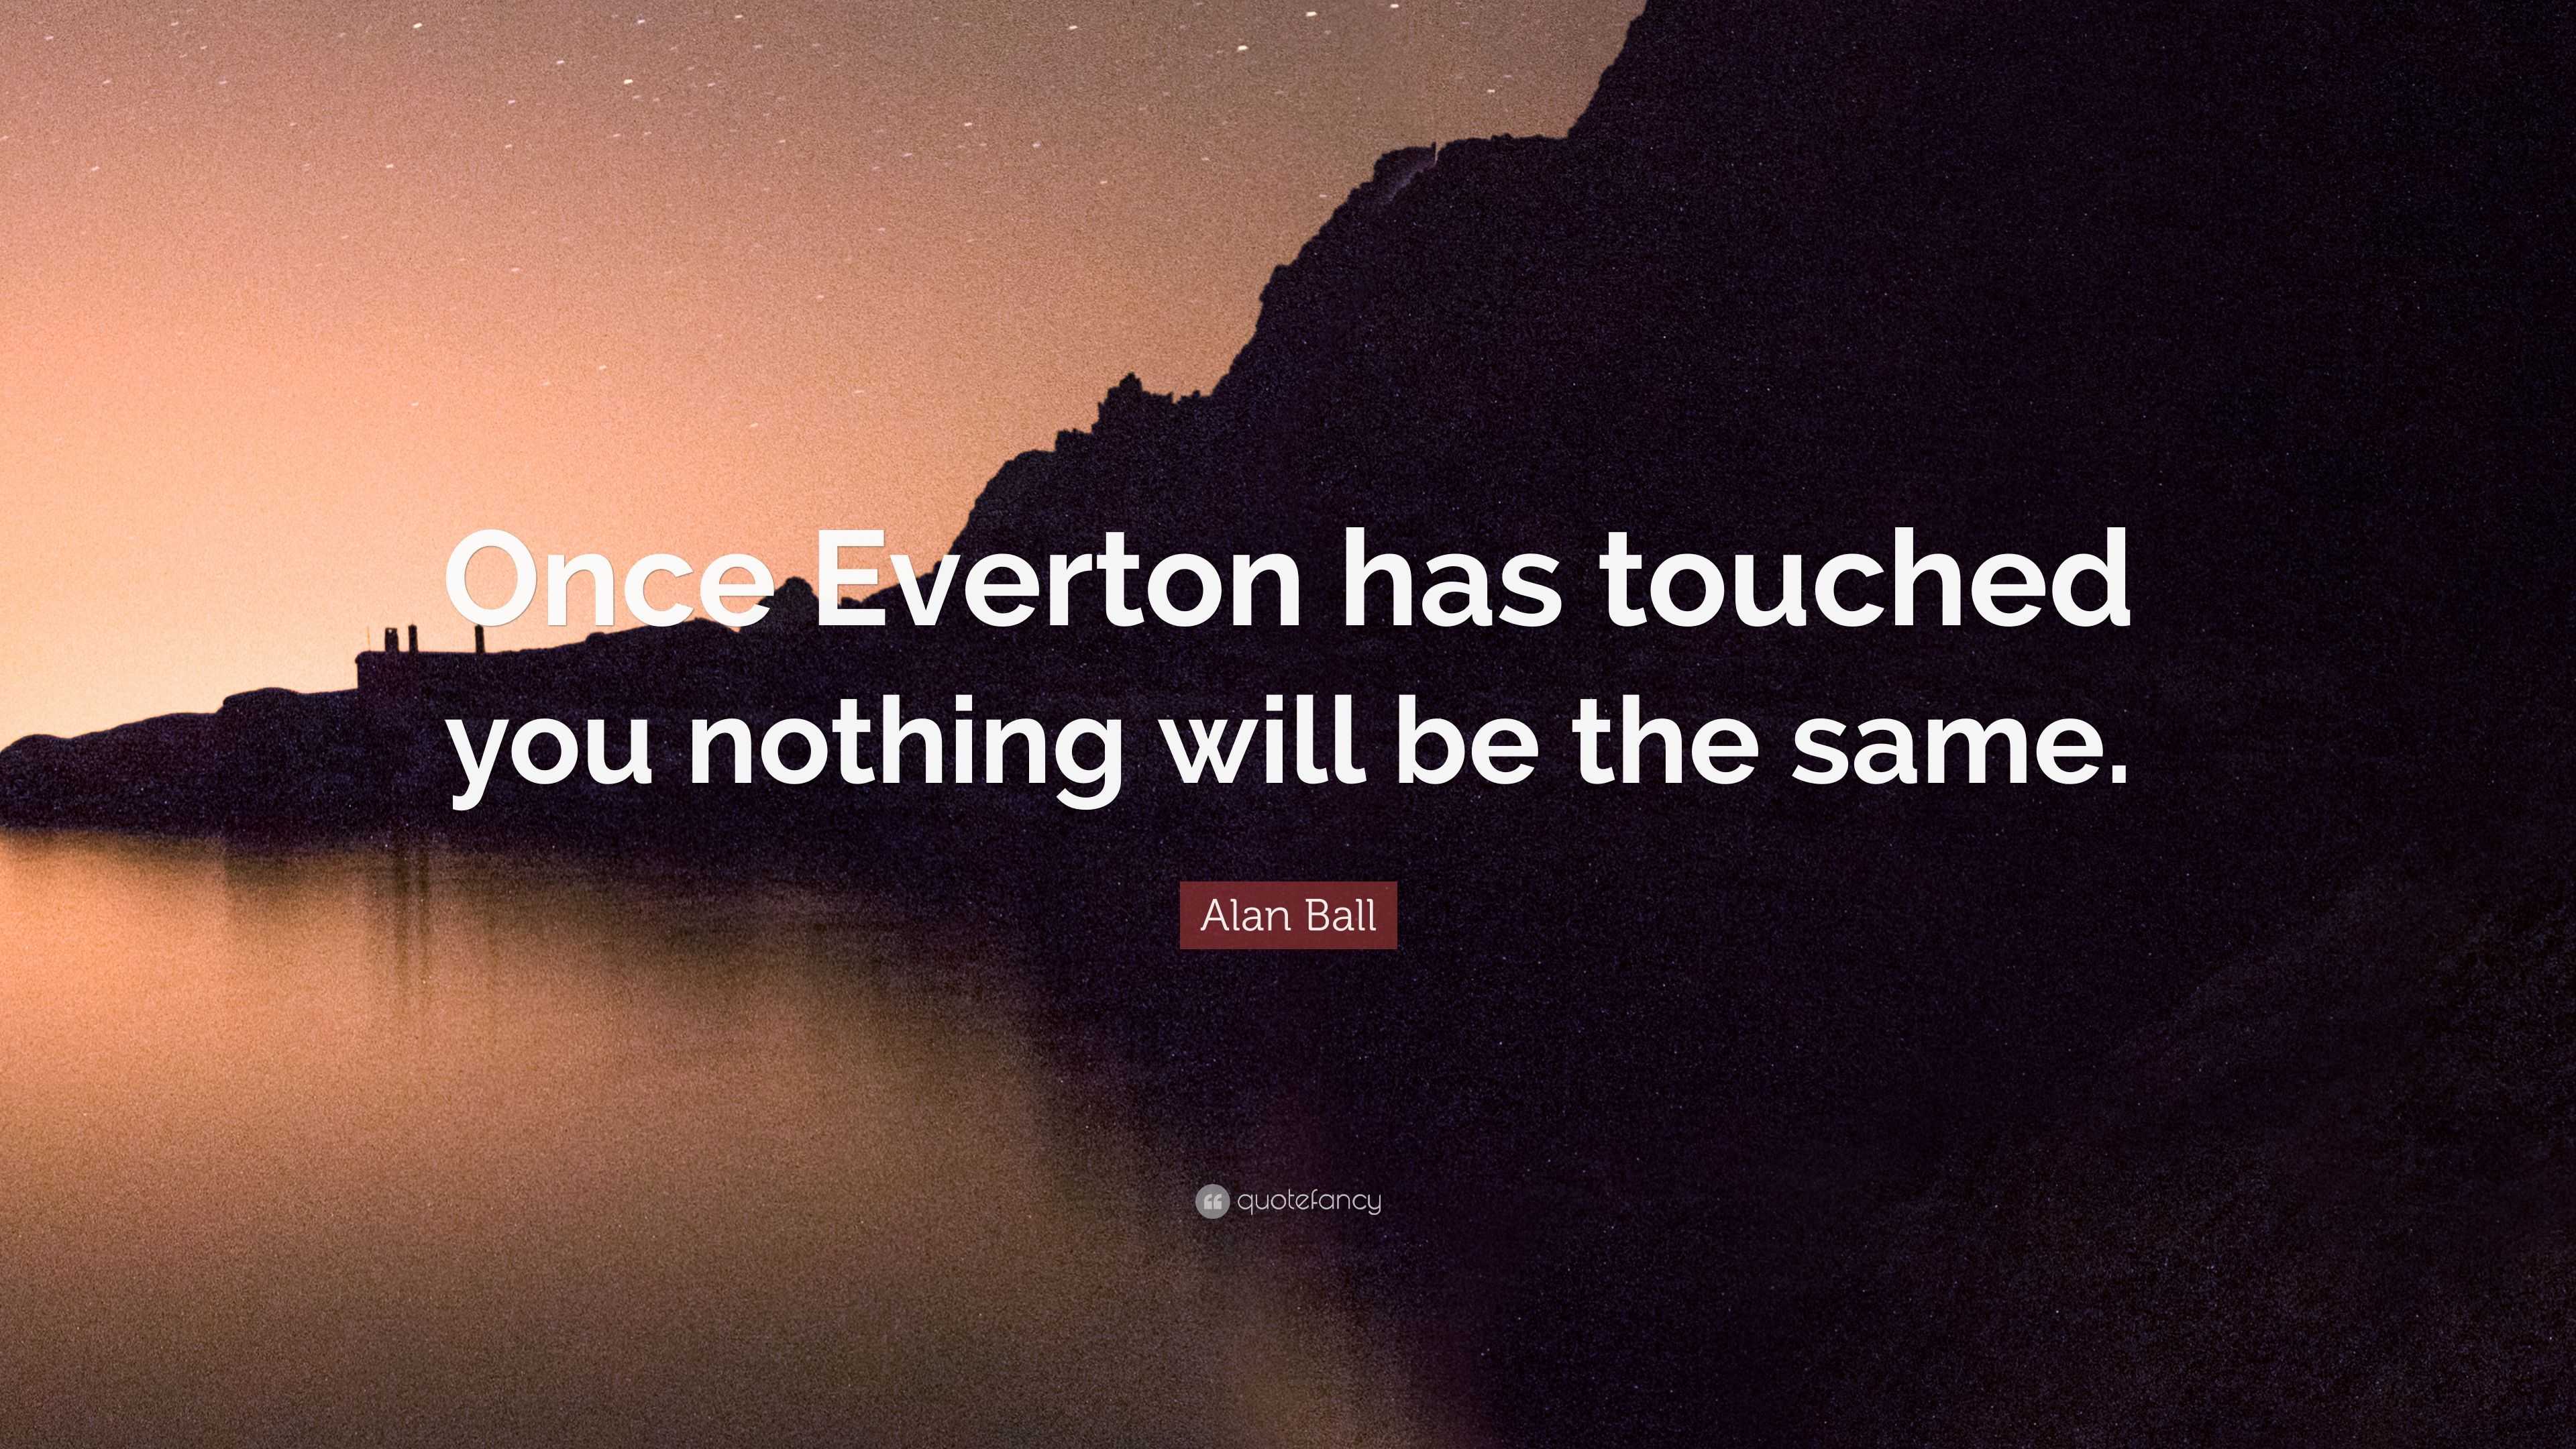 Alan Ball Quote: “Once Everton has touched you nothing will be the same.”